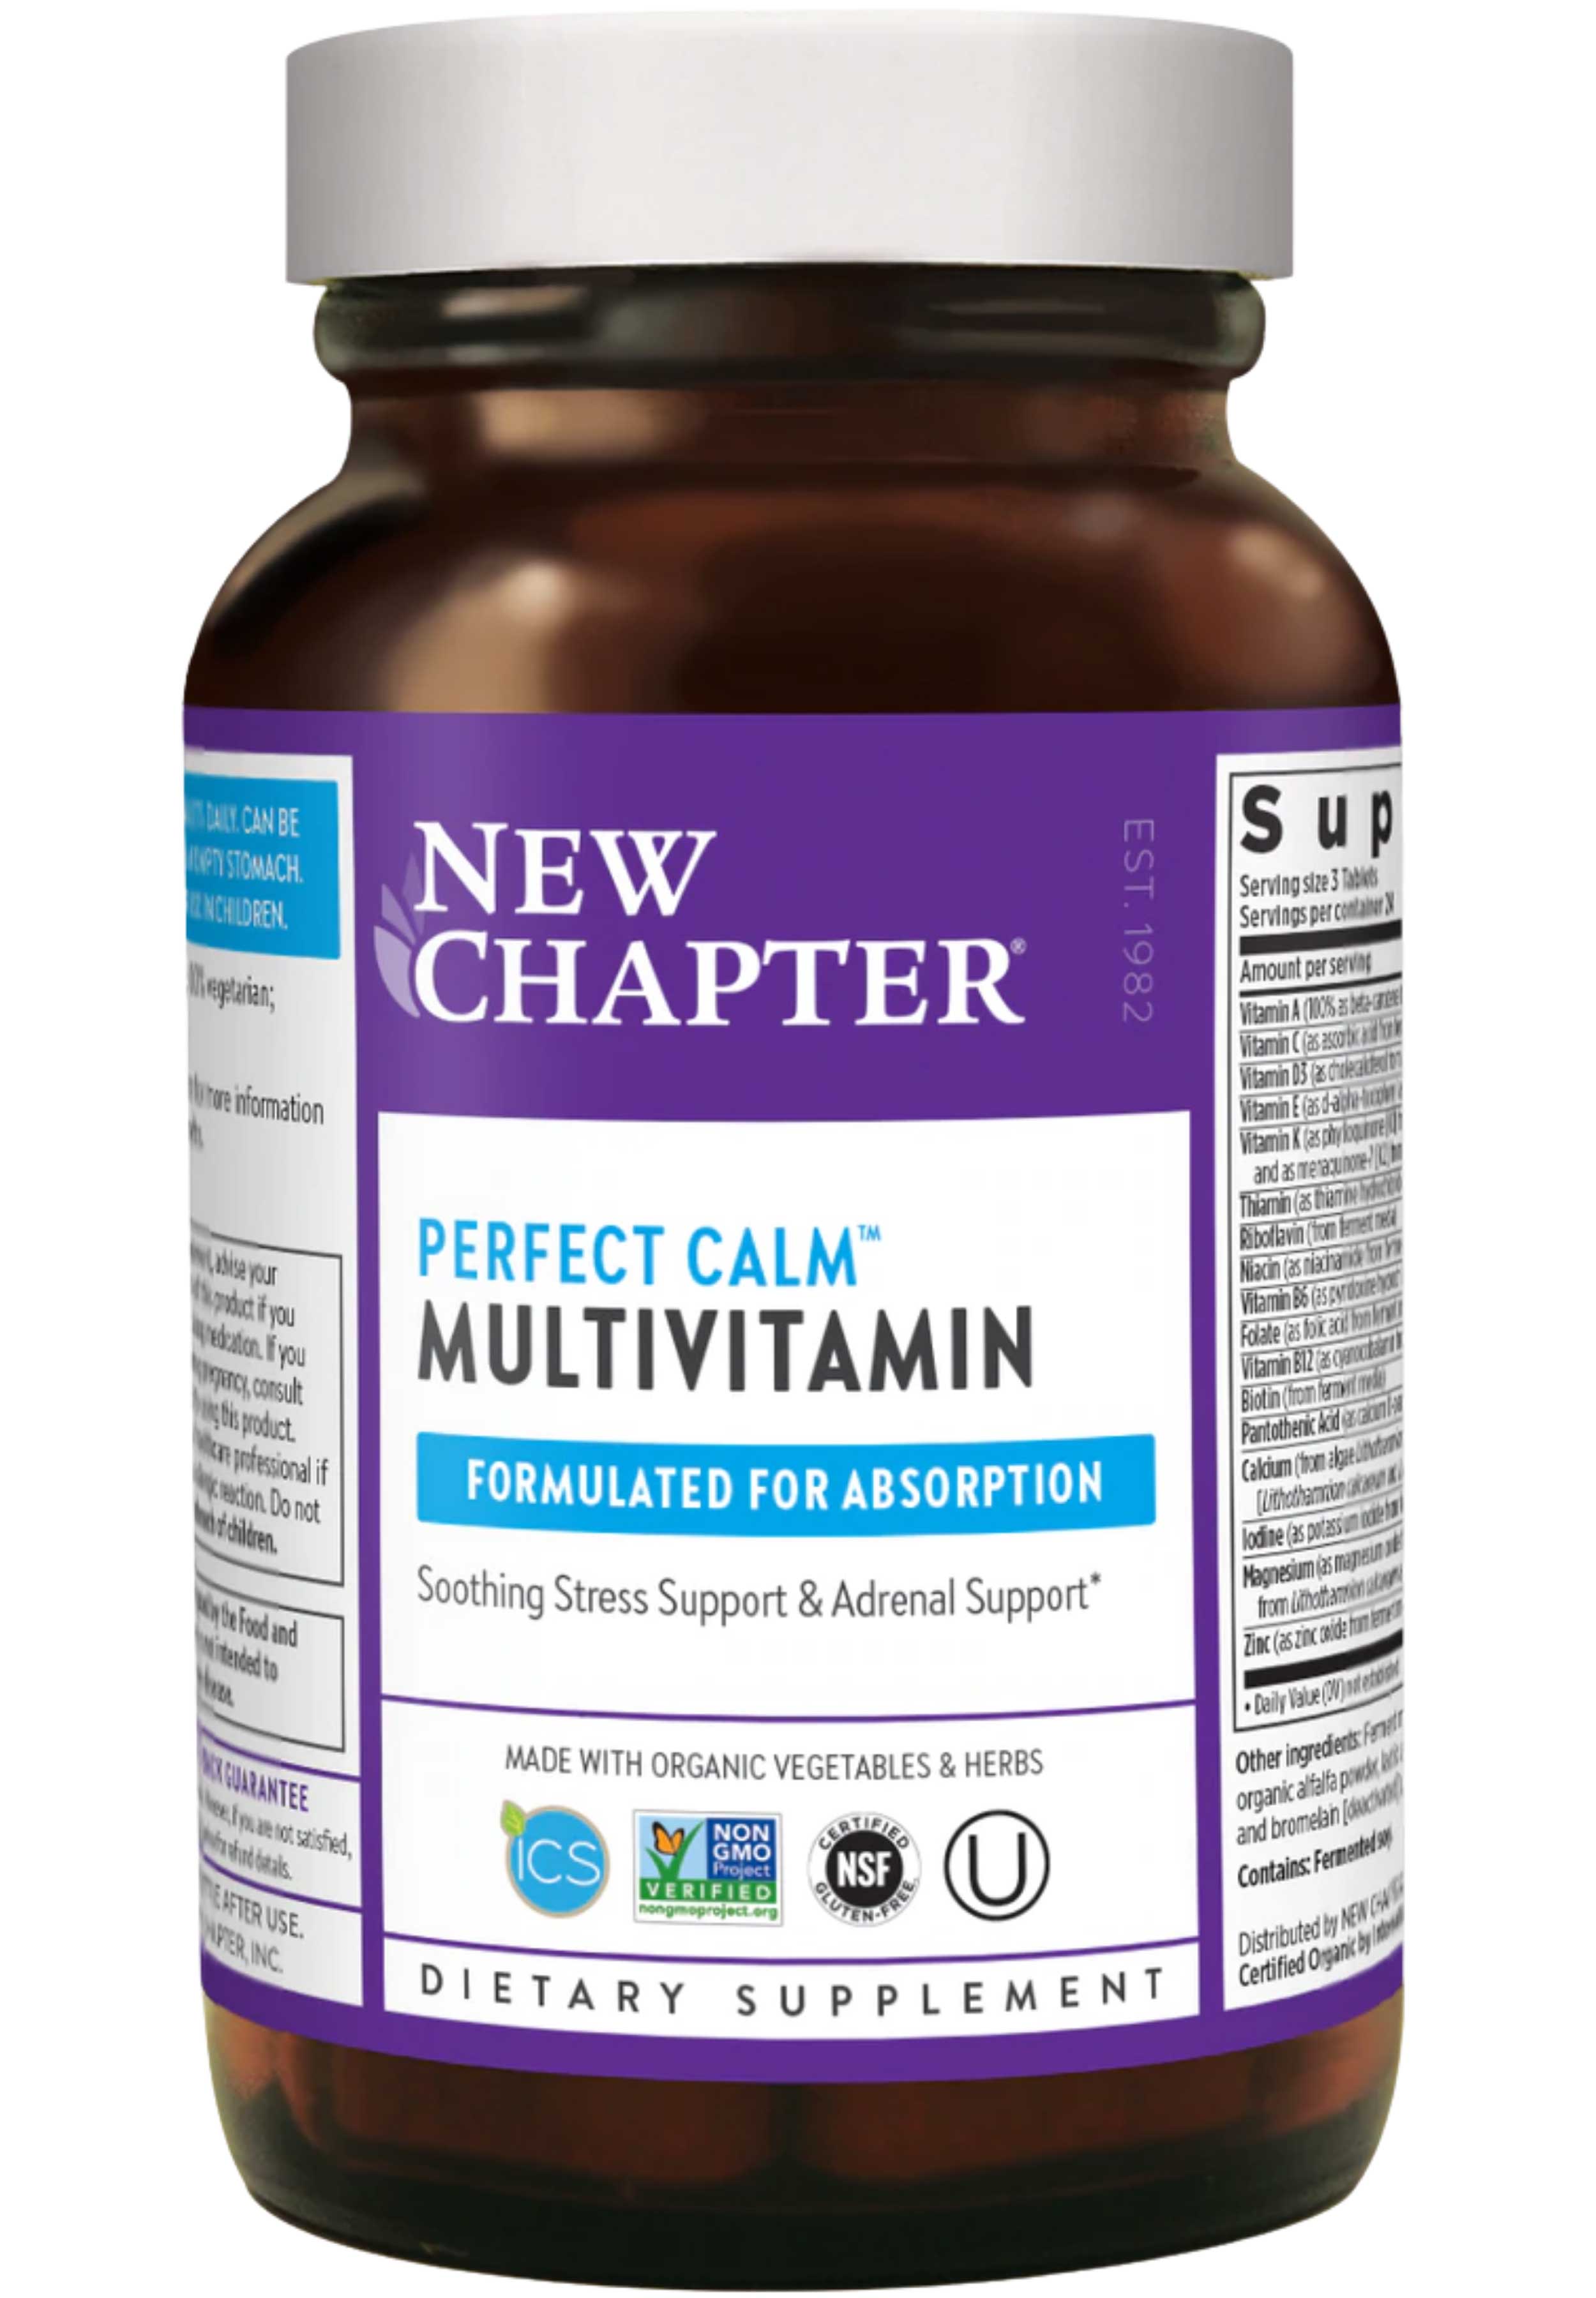 New Chapter Perfect Calm Multivitamin